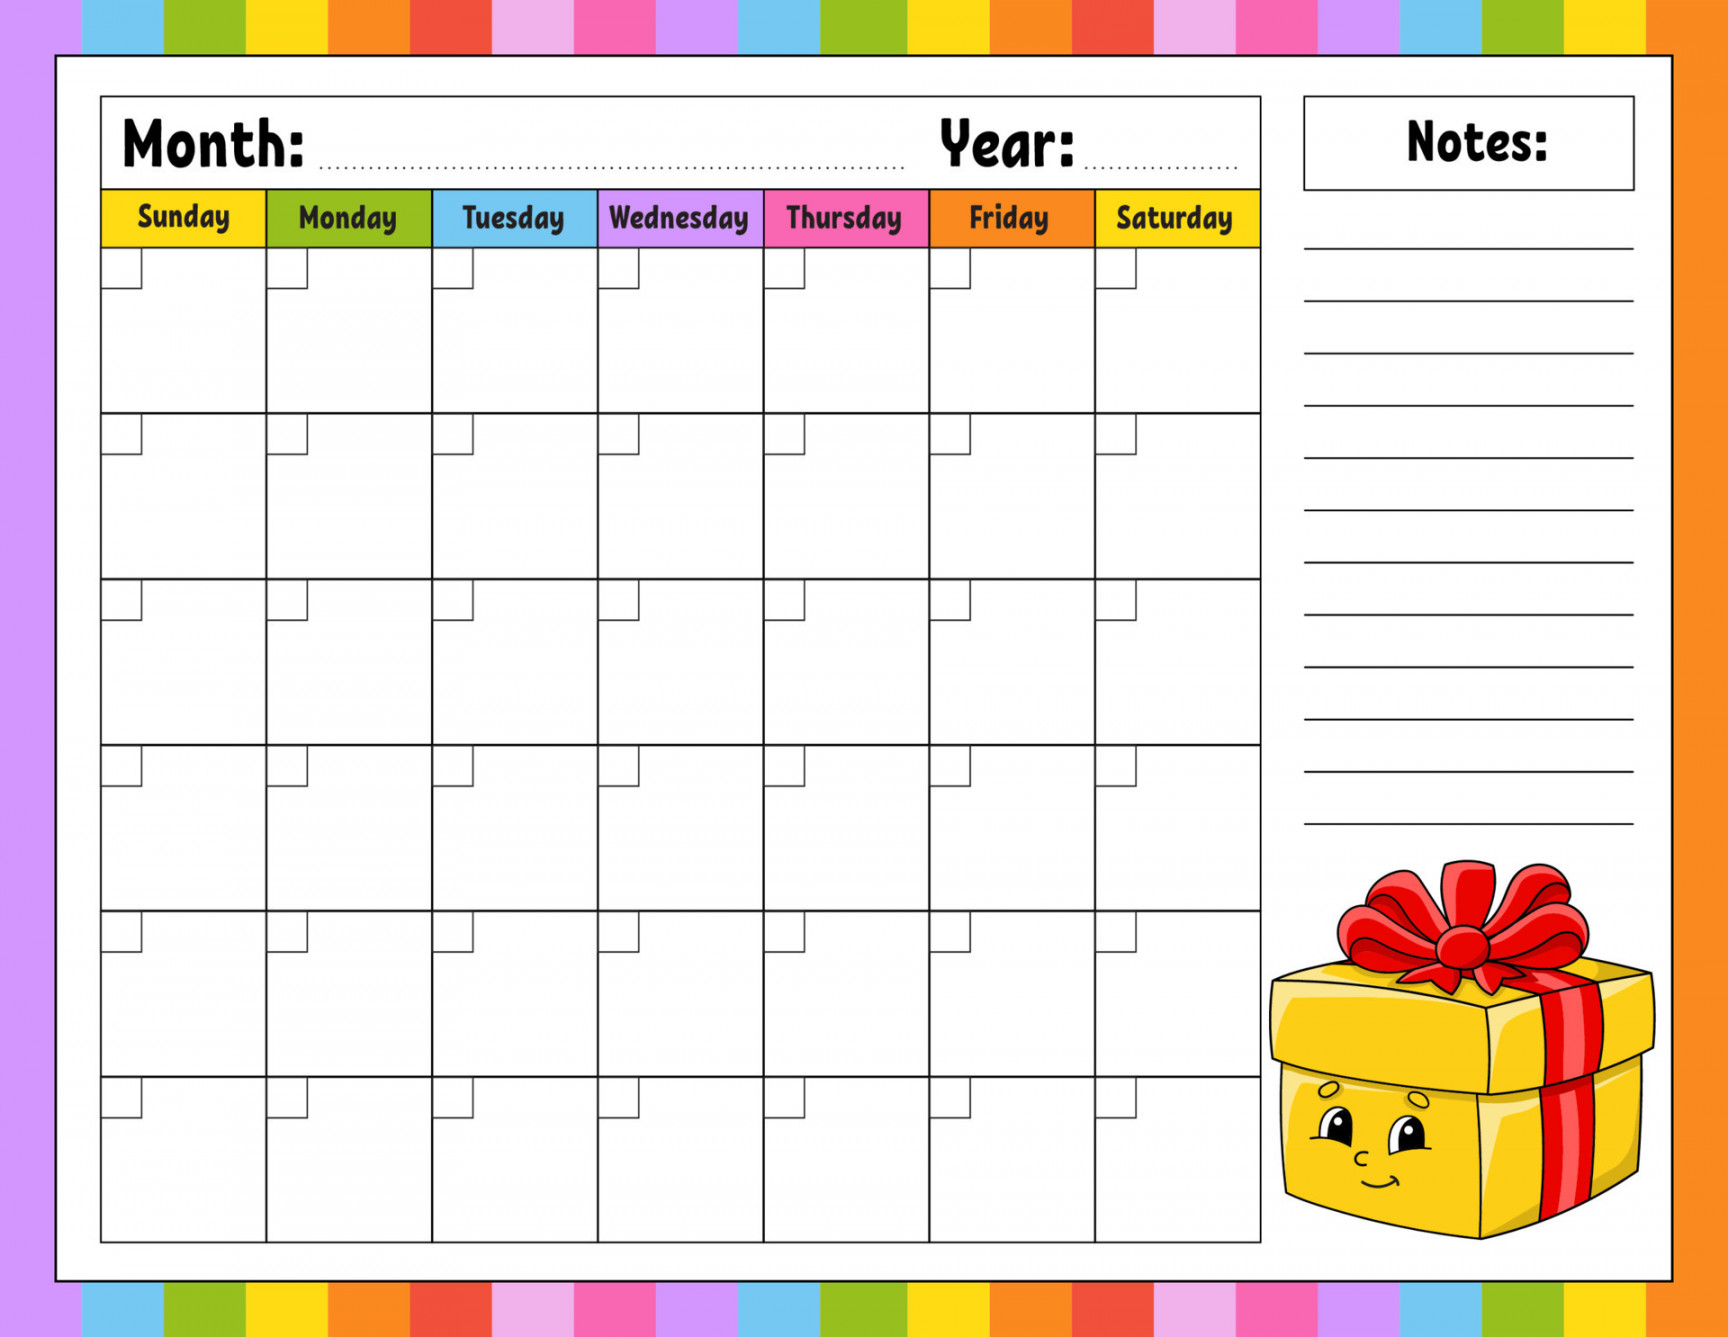 Blank calendar template for one month without dates